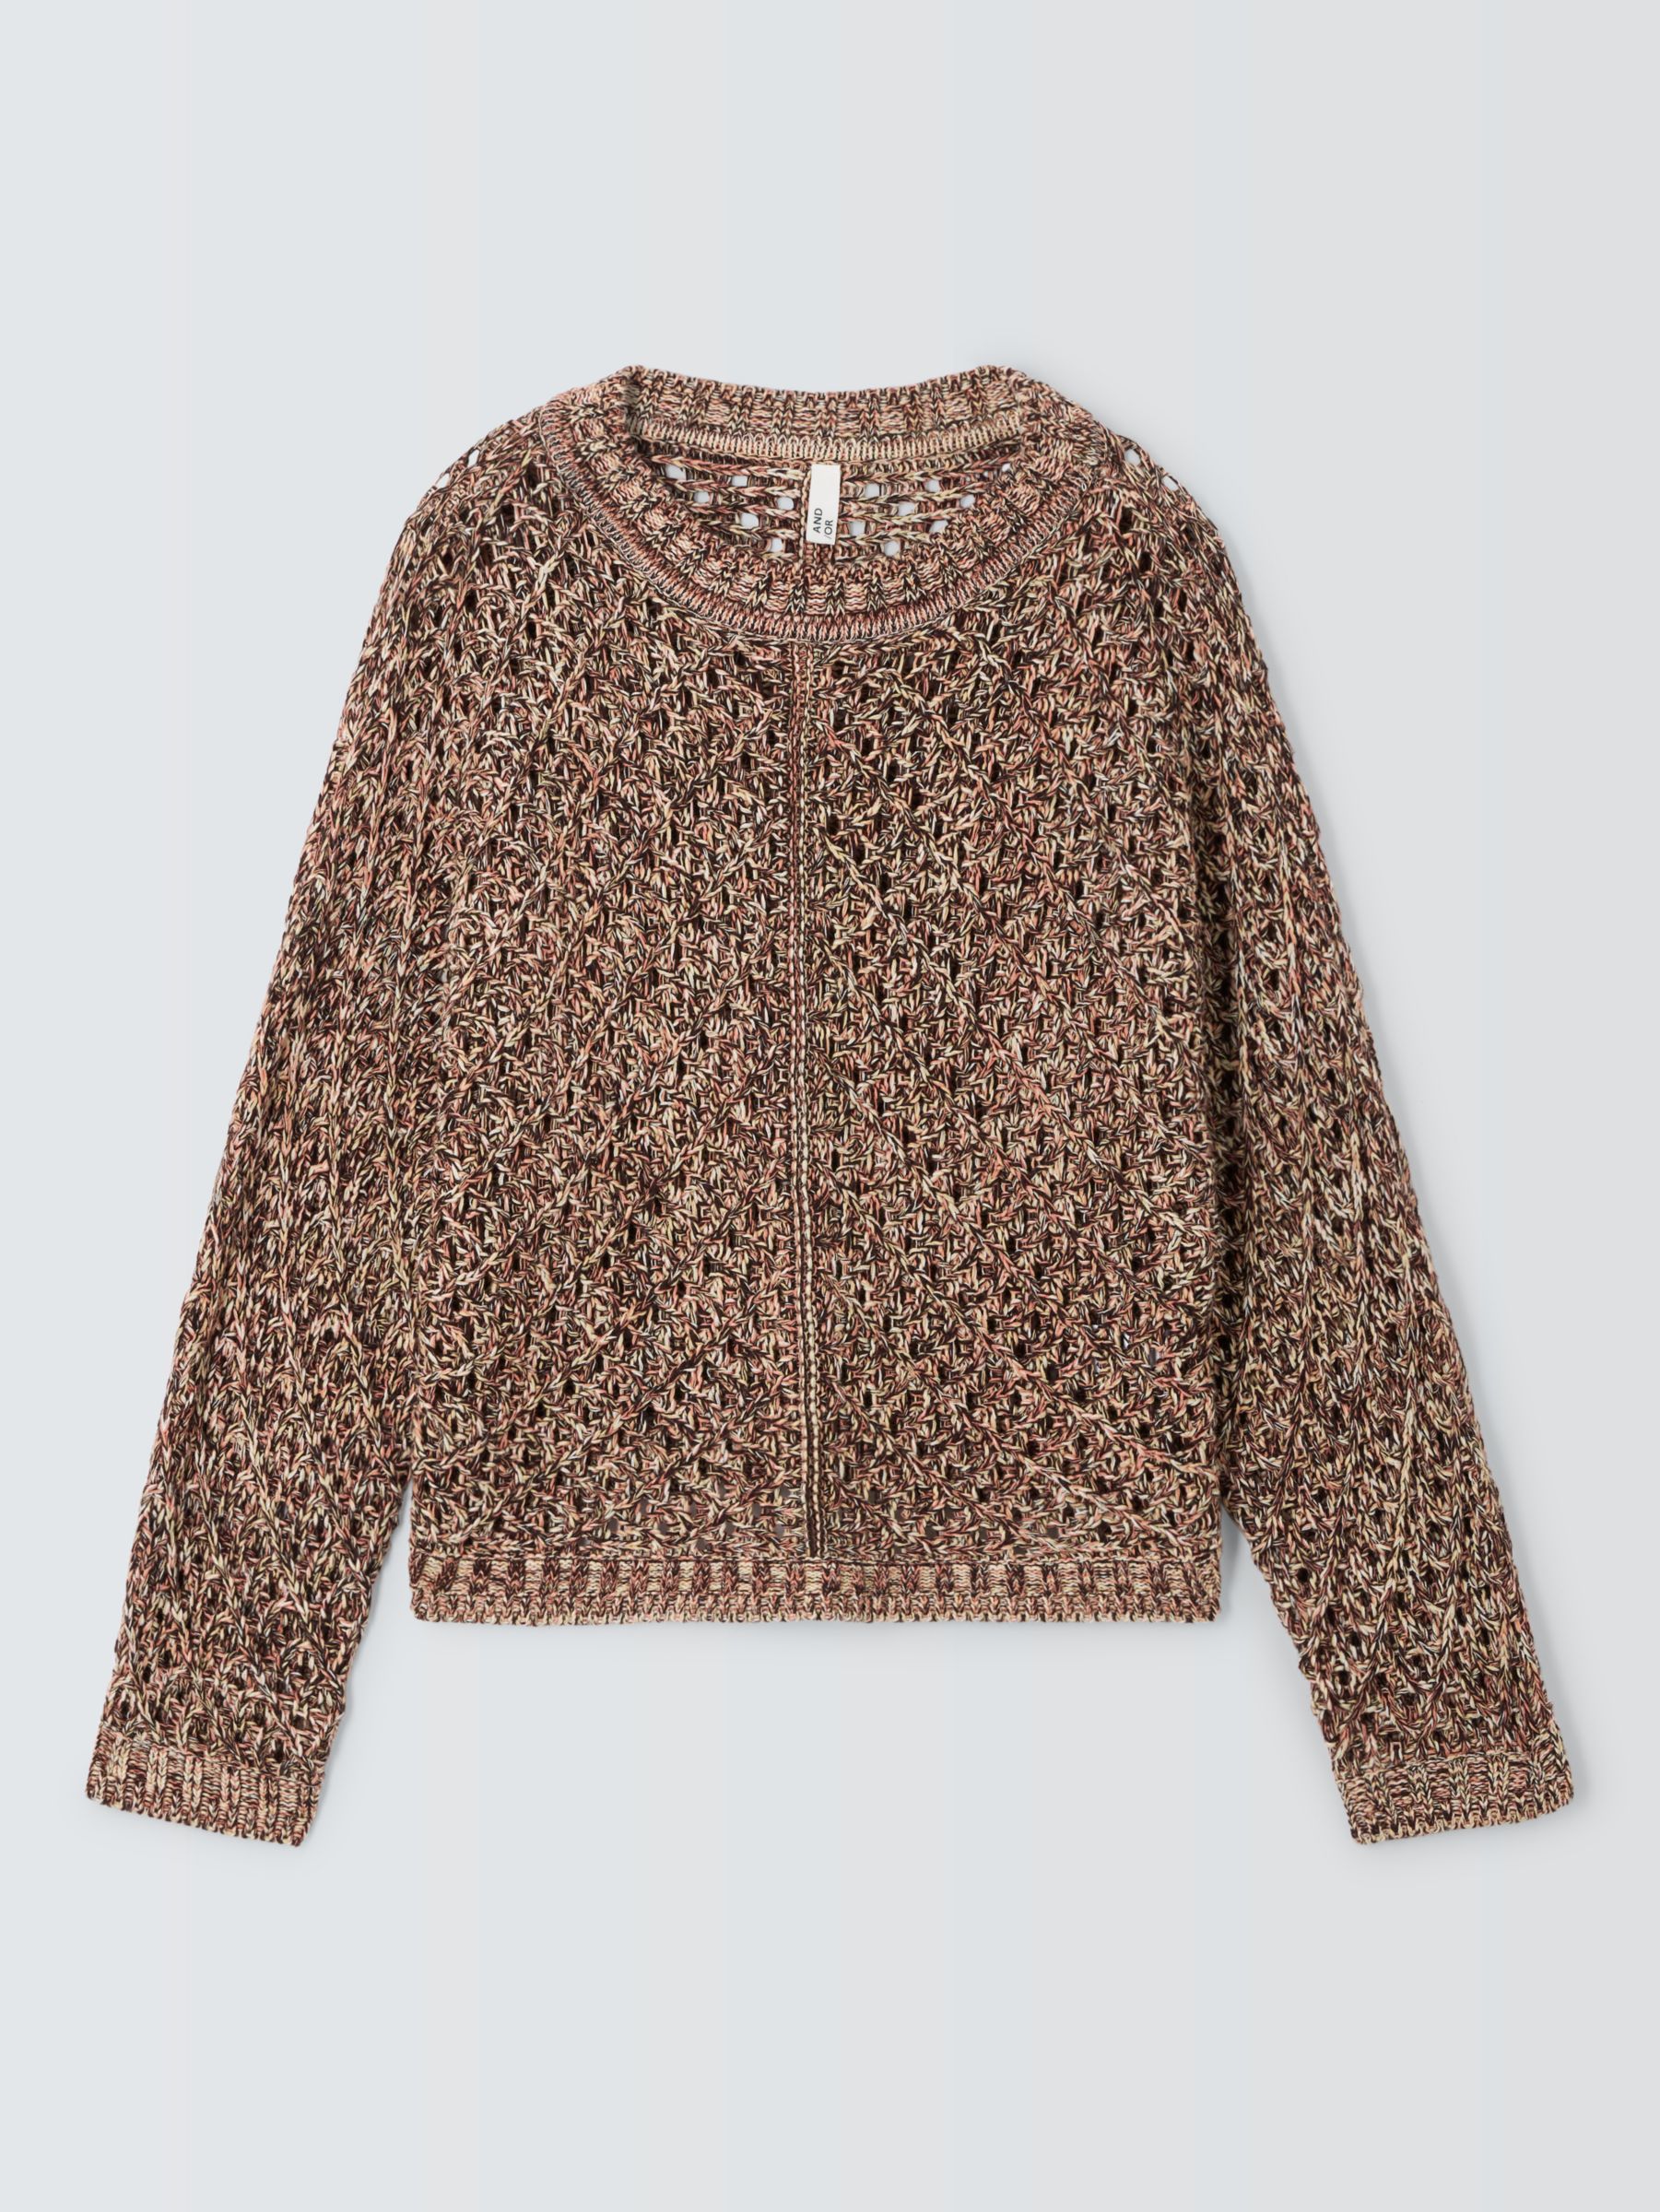 AND/OR Naomi Diamond Knit Jumper, Soft Pink, S